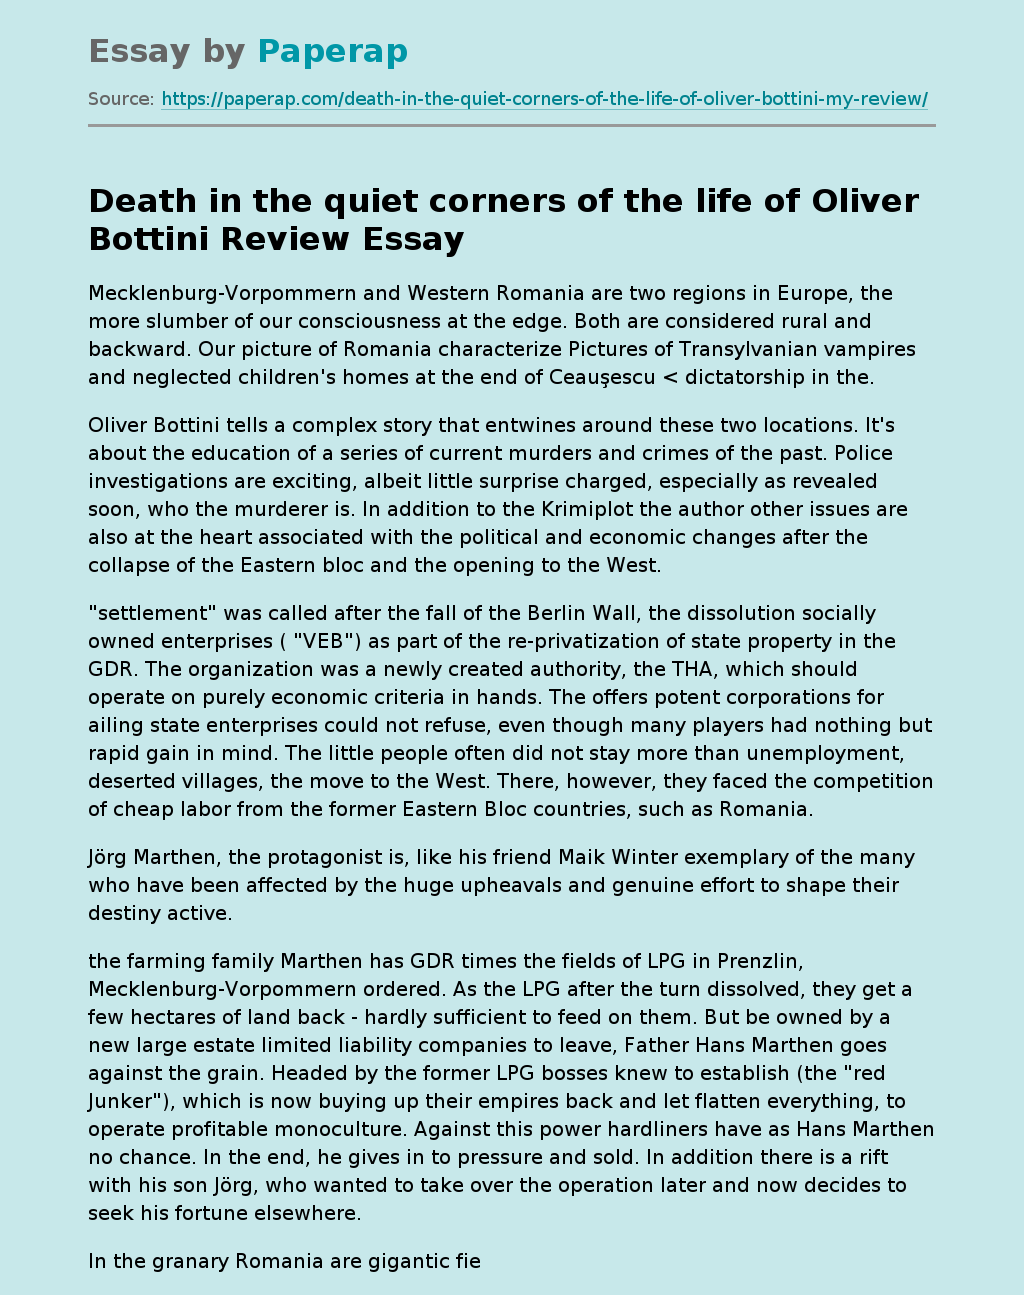 Death in the quiet corners of the life of Oliver Bottini Review